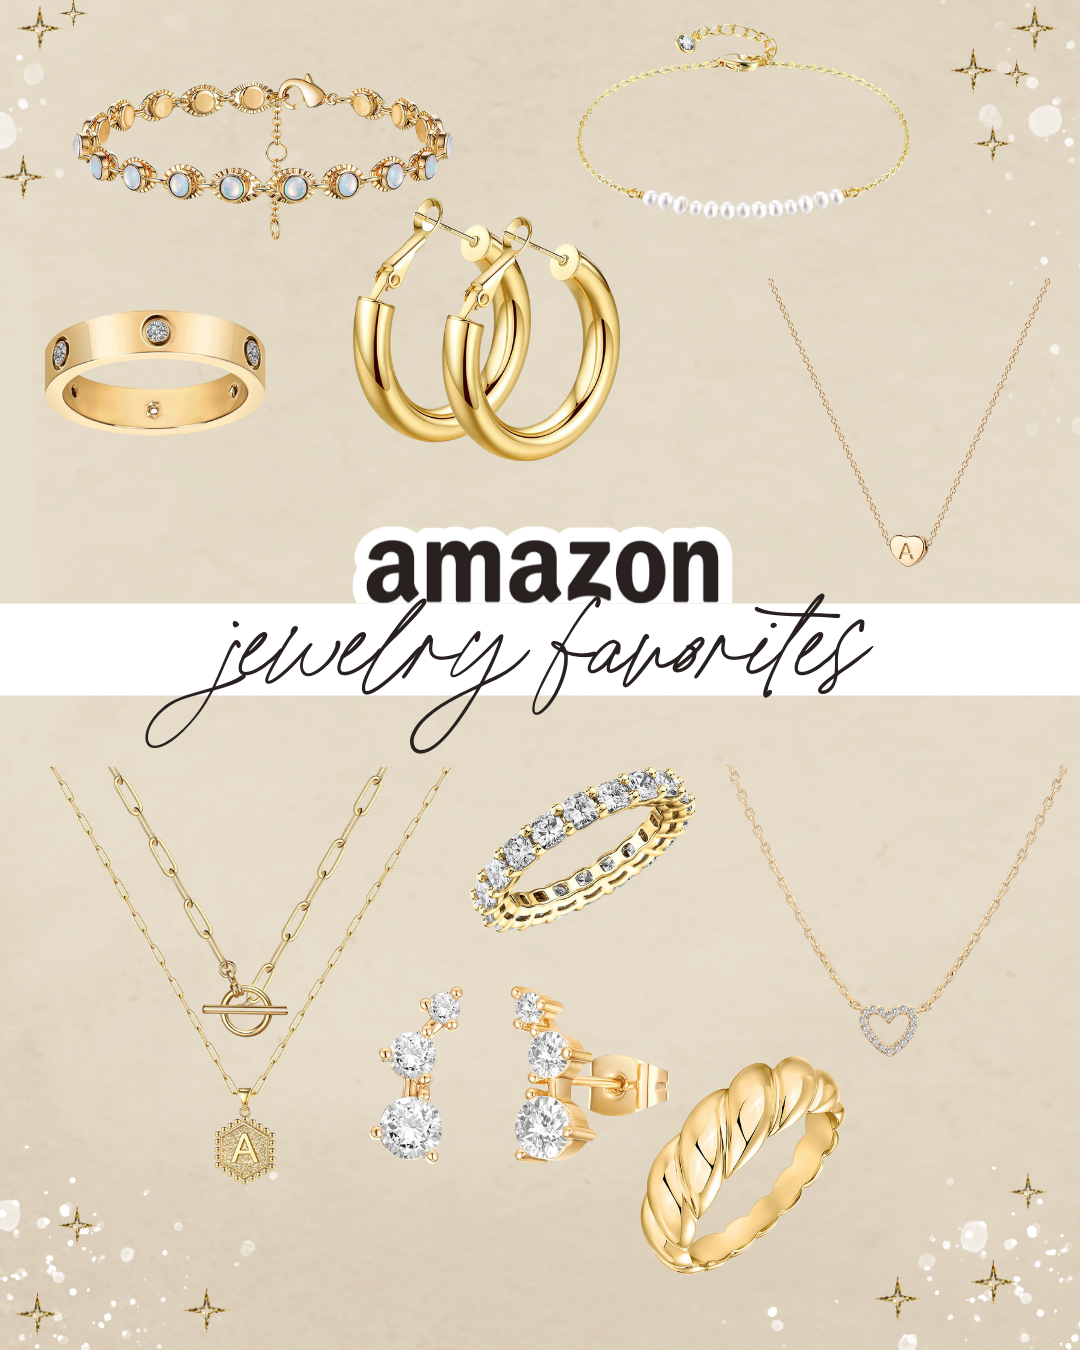 Amazon Gift Ideas - Amazon Gift Ideas for Her | Affordable by Amanda